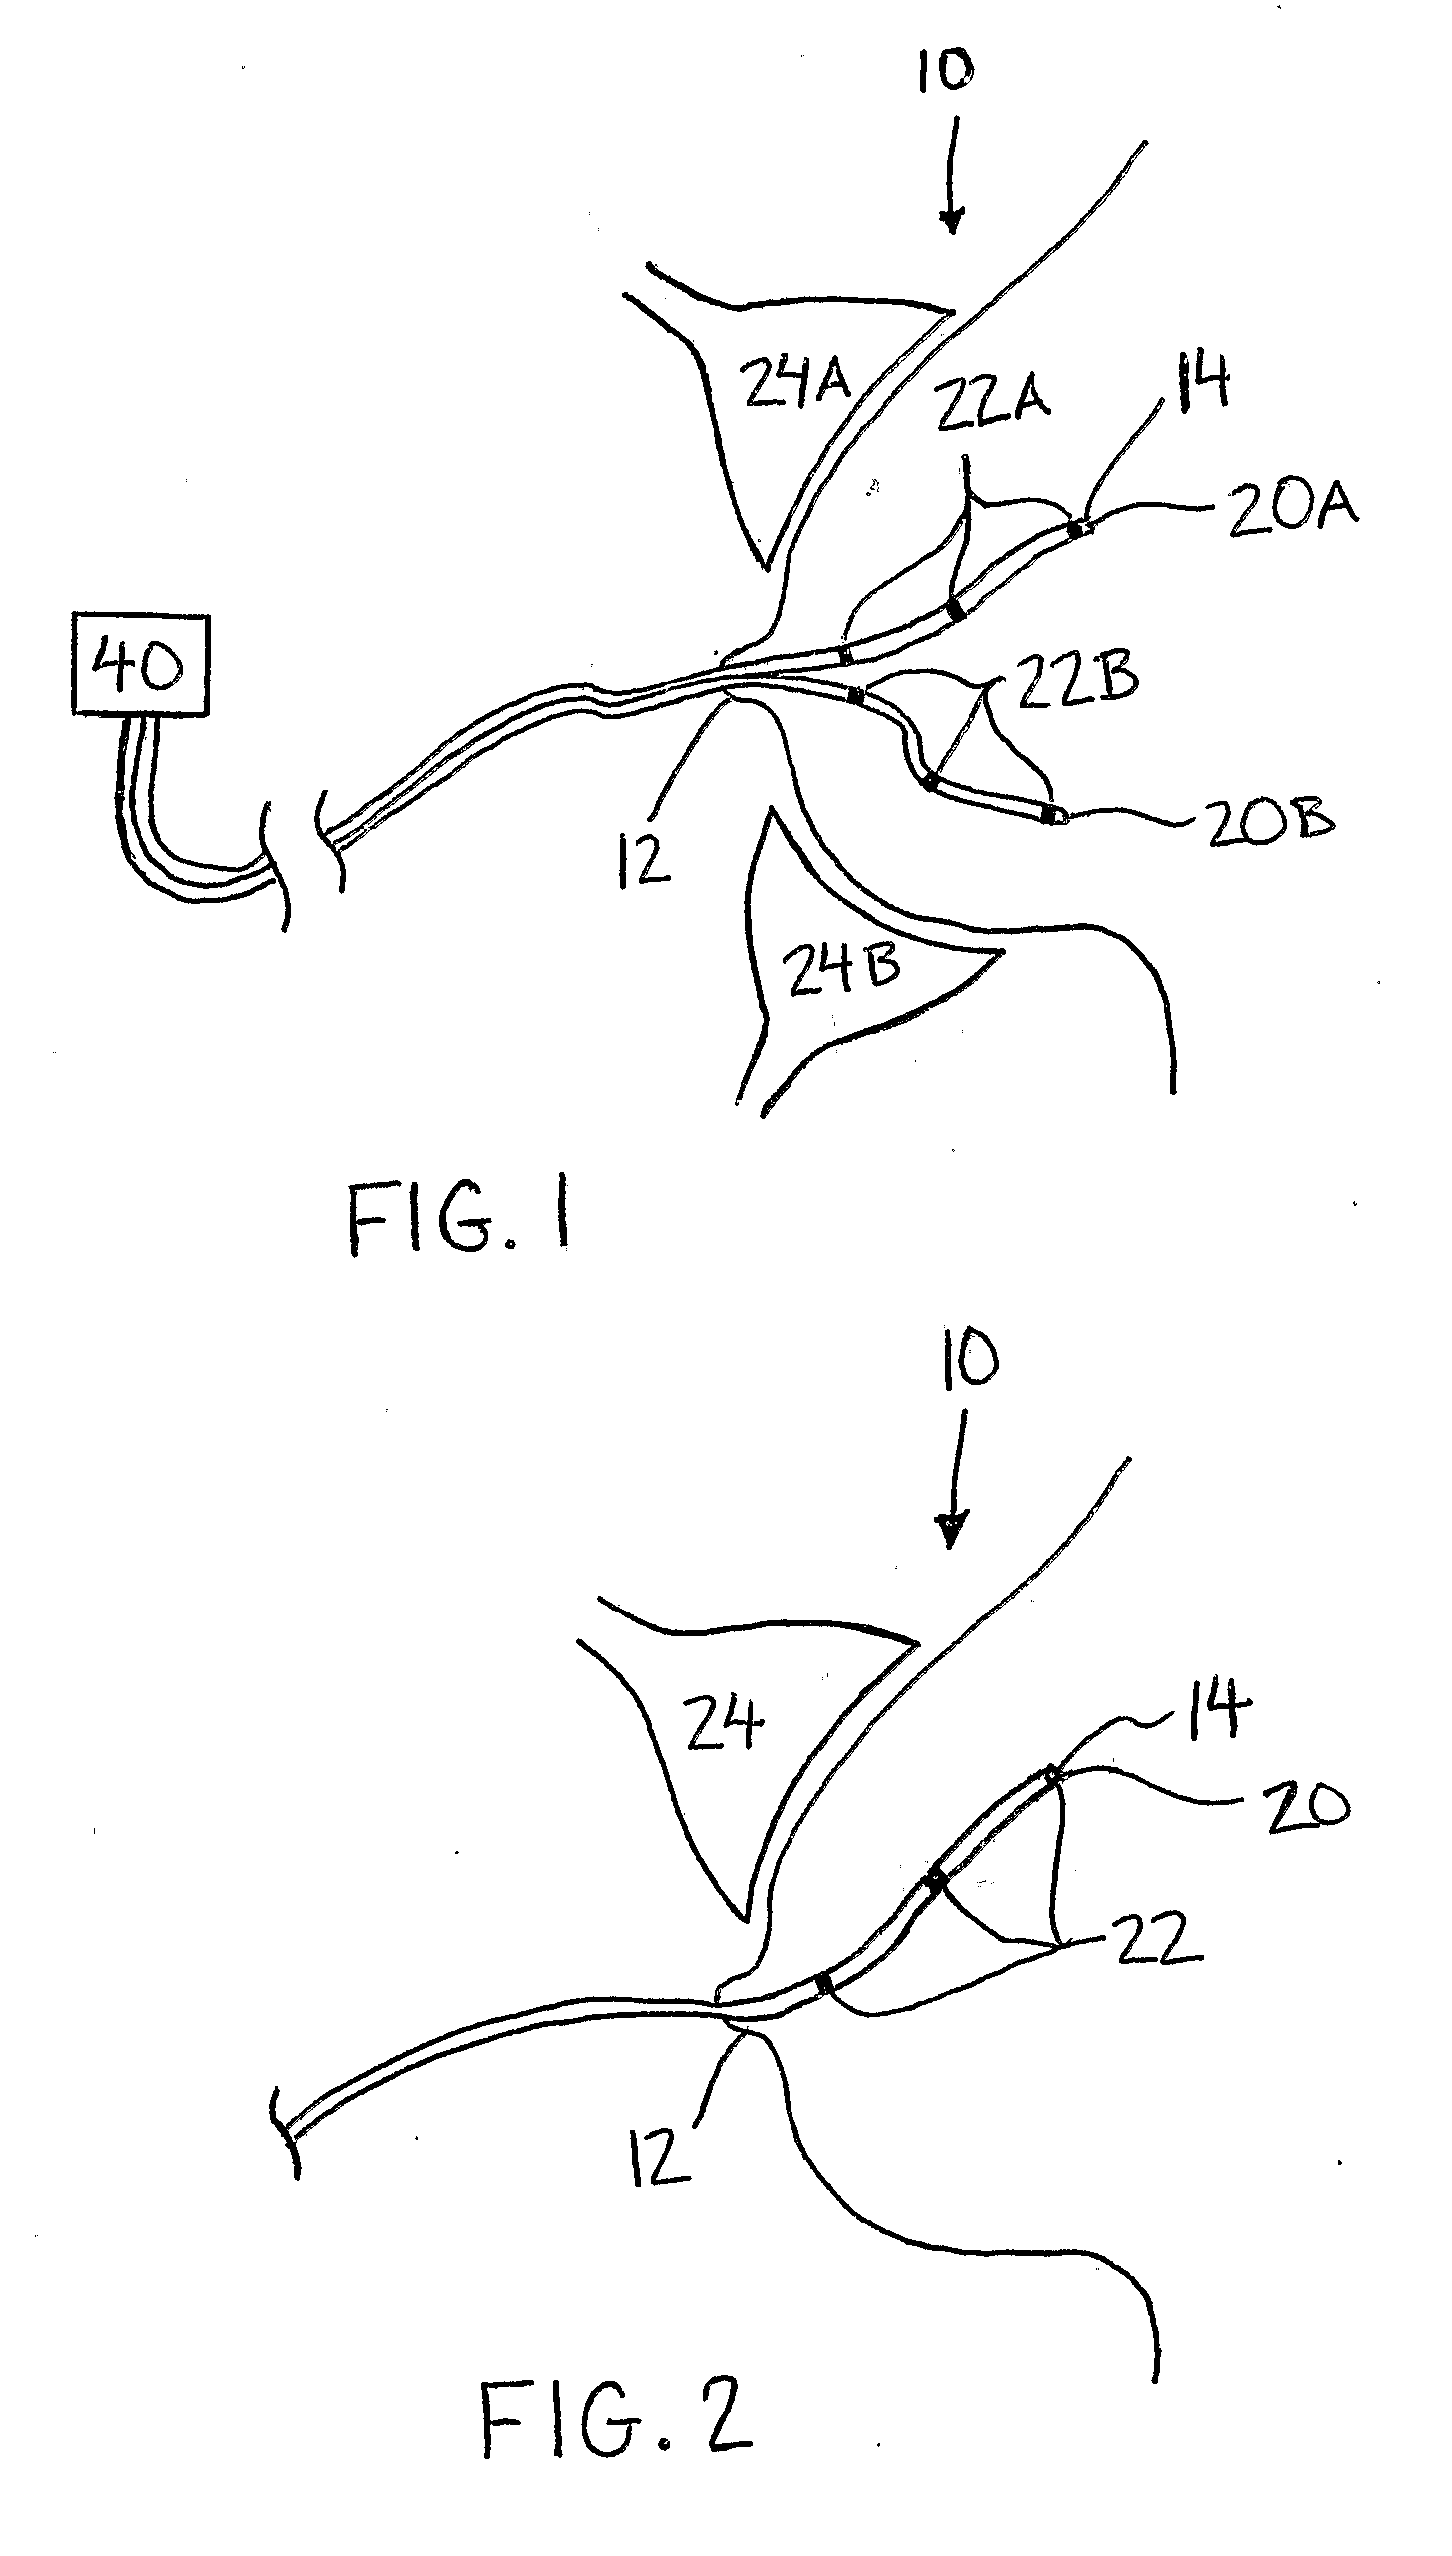 System and Micro-Catheter Devices for Medical Imaging of the Breast